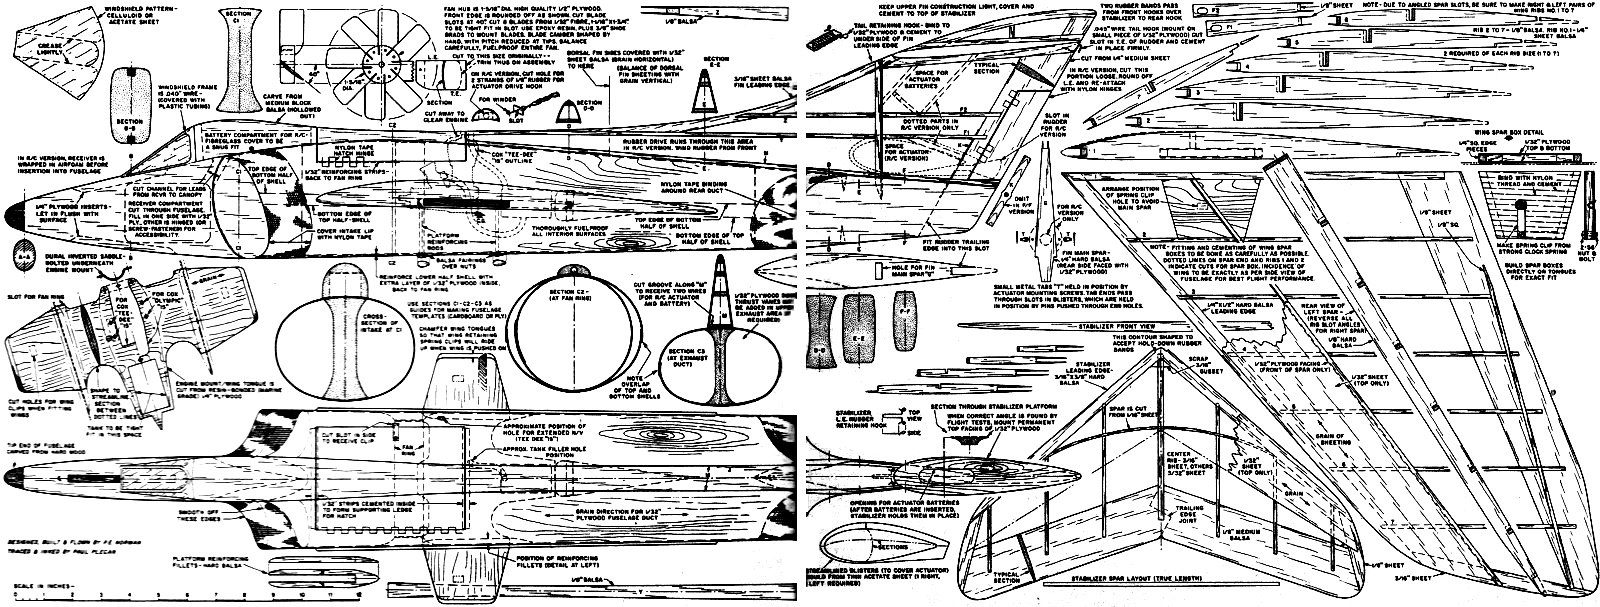 ... Article &amp; Plans, June 1962 American Modeler - Airplanes and Rockets